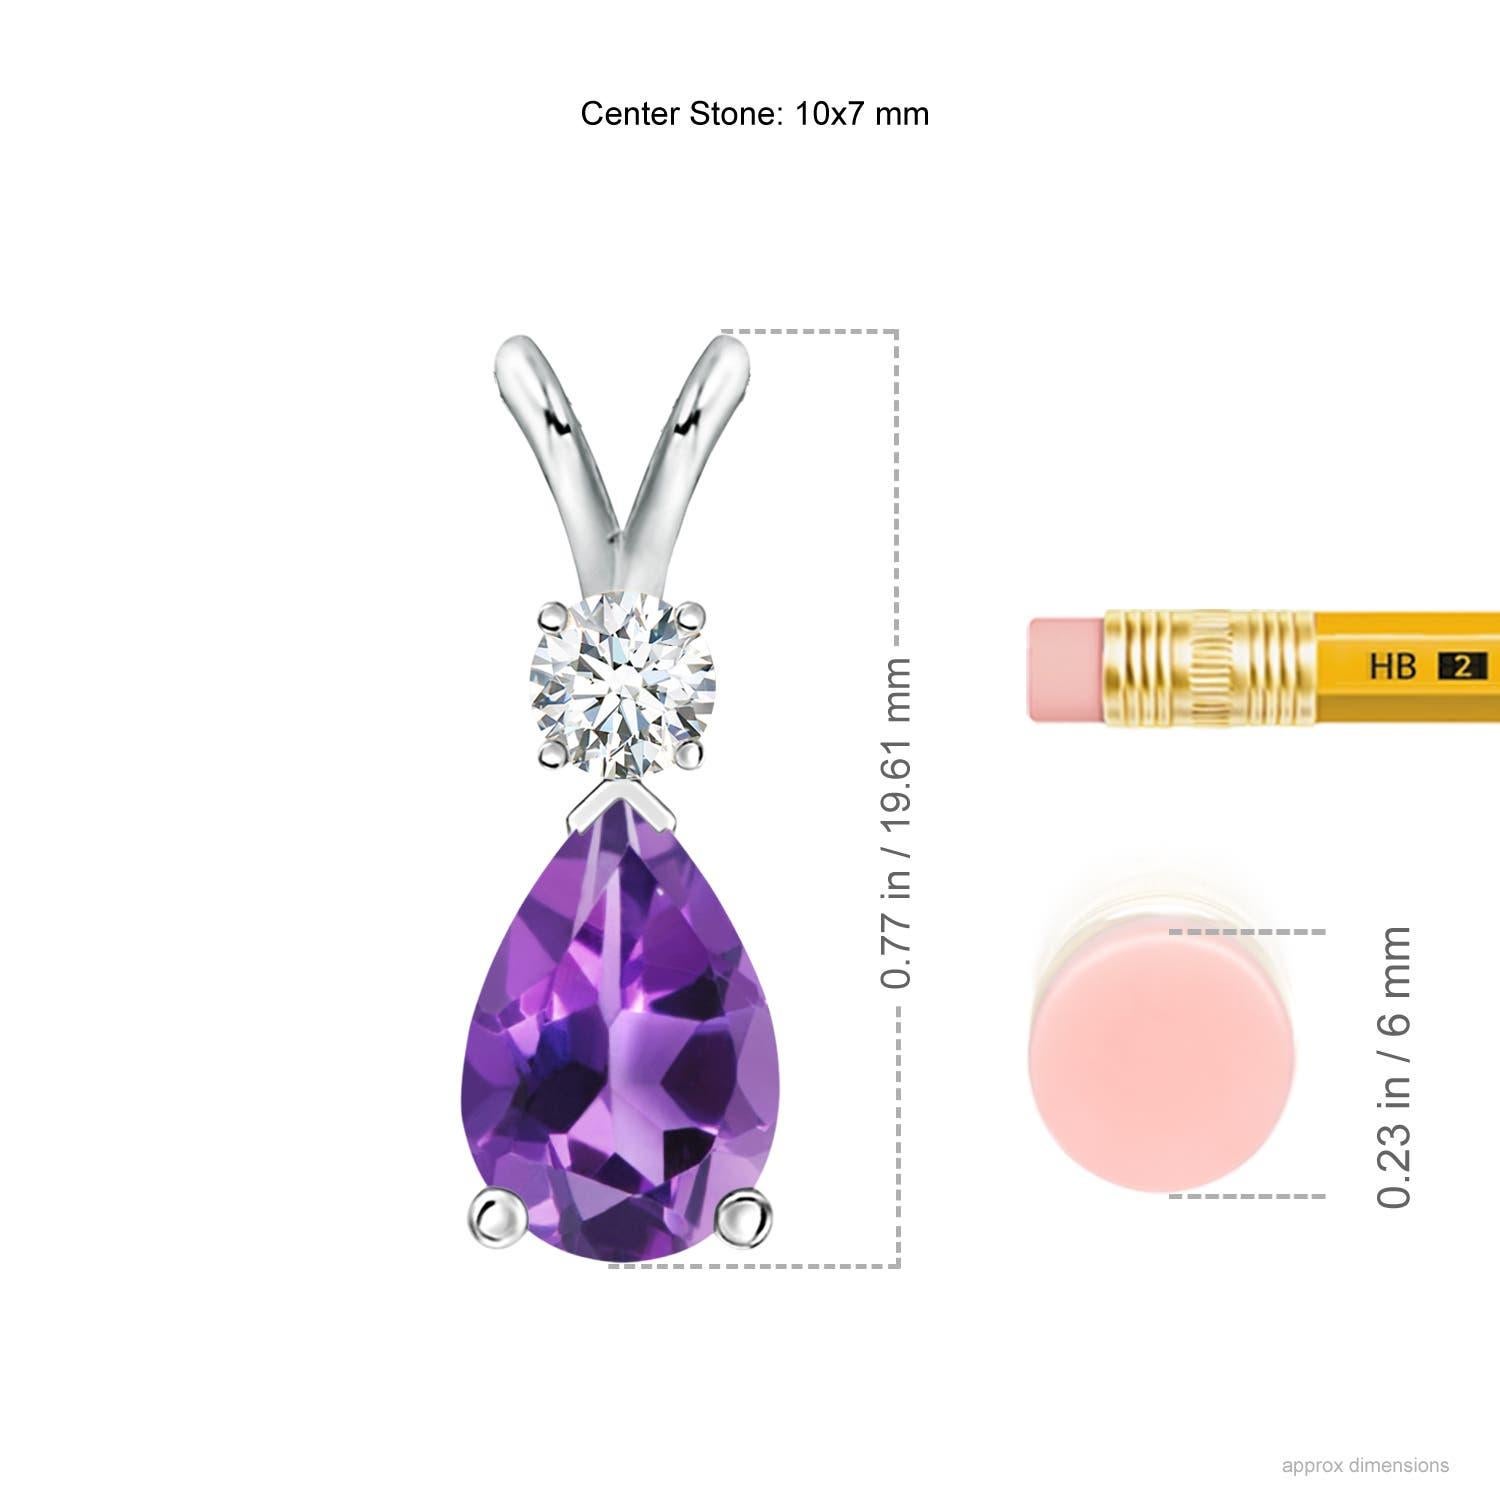 A pear-shaped deep purple amethyst is secured in a prong setting and embellished with a diamond accent on the top. Simple yet stunning, this teardrop amethyst pendant with V bale is sculpted in 14k white gold.
Amethyst is the Birthstone for February